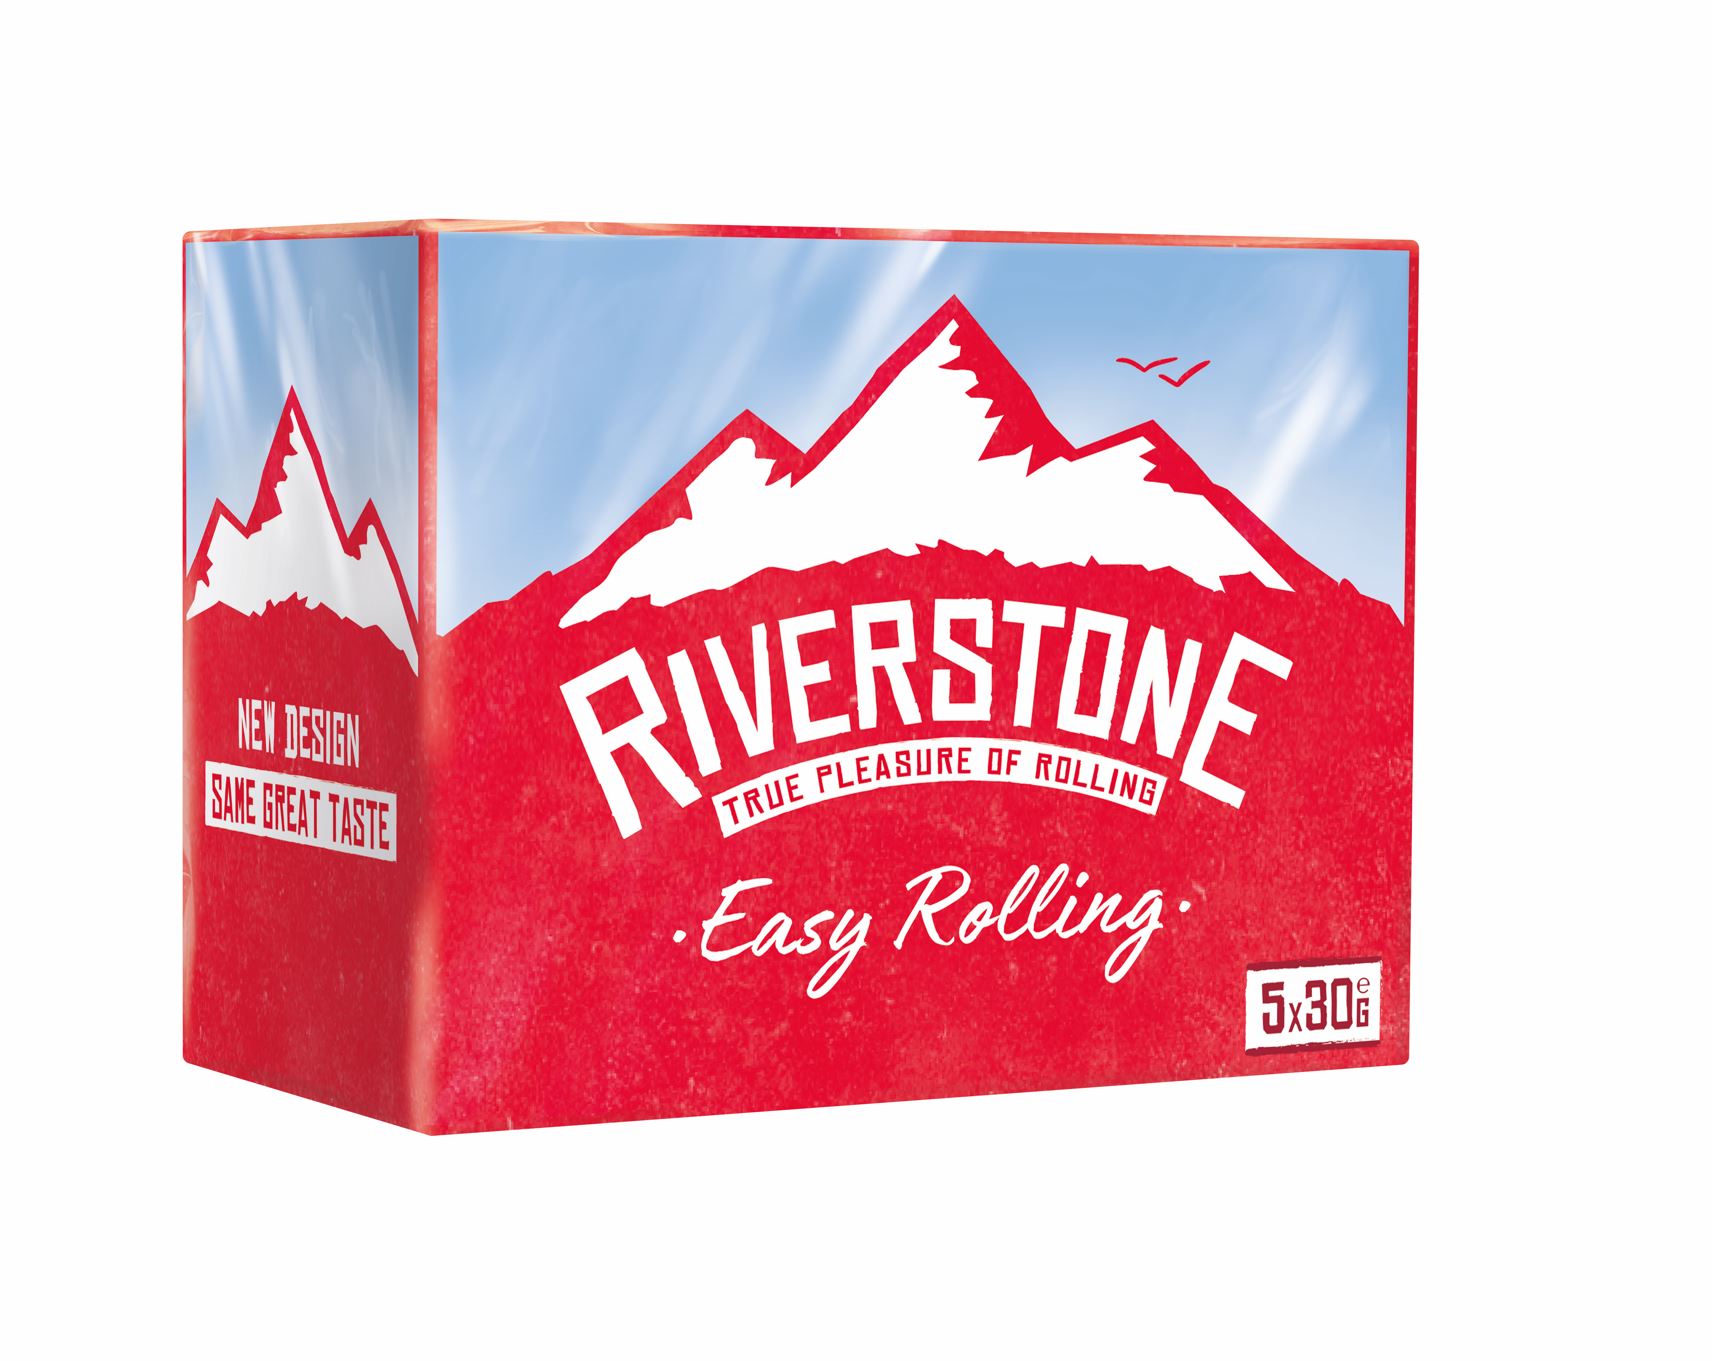 Riverstone gets new look